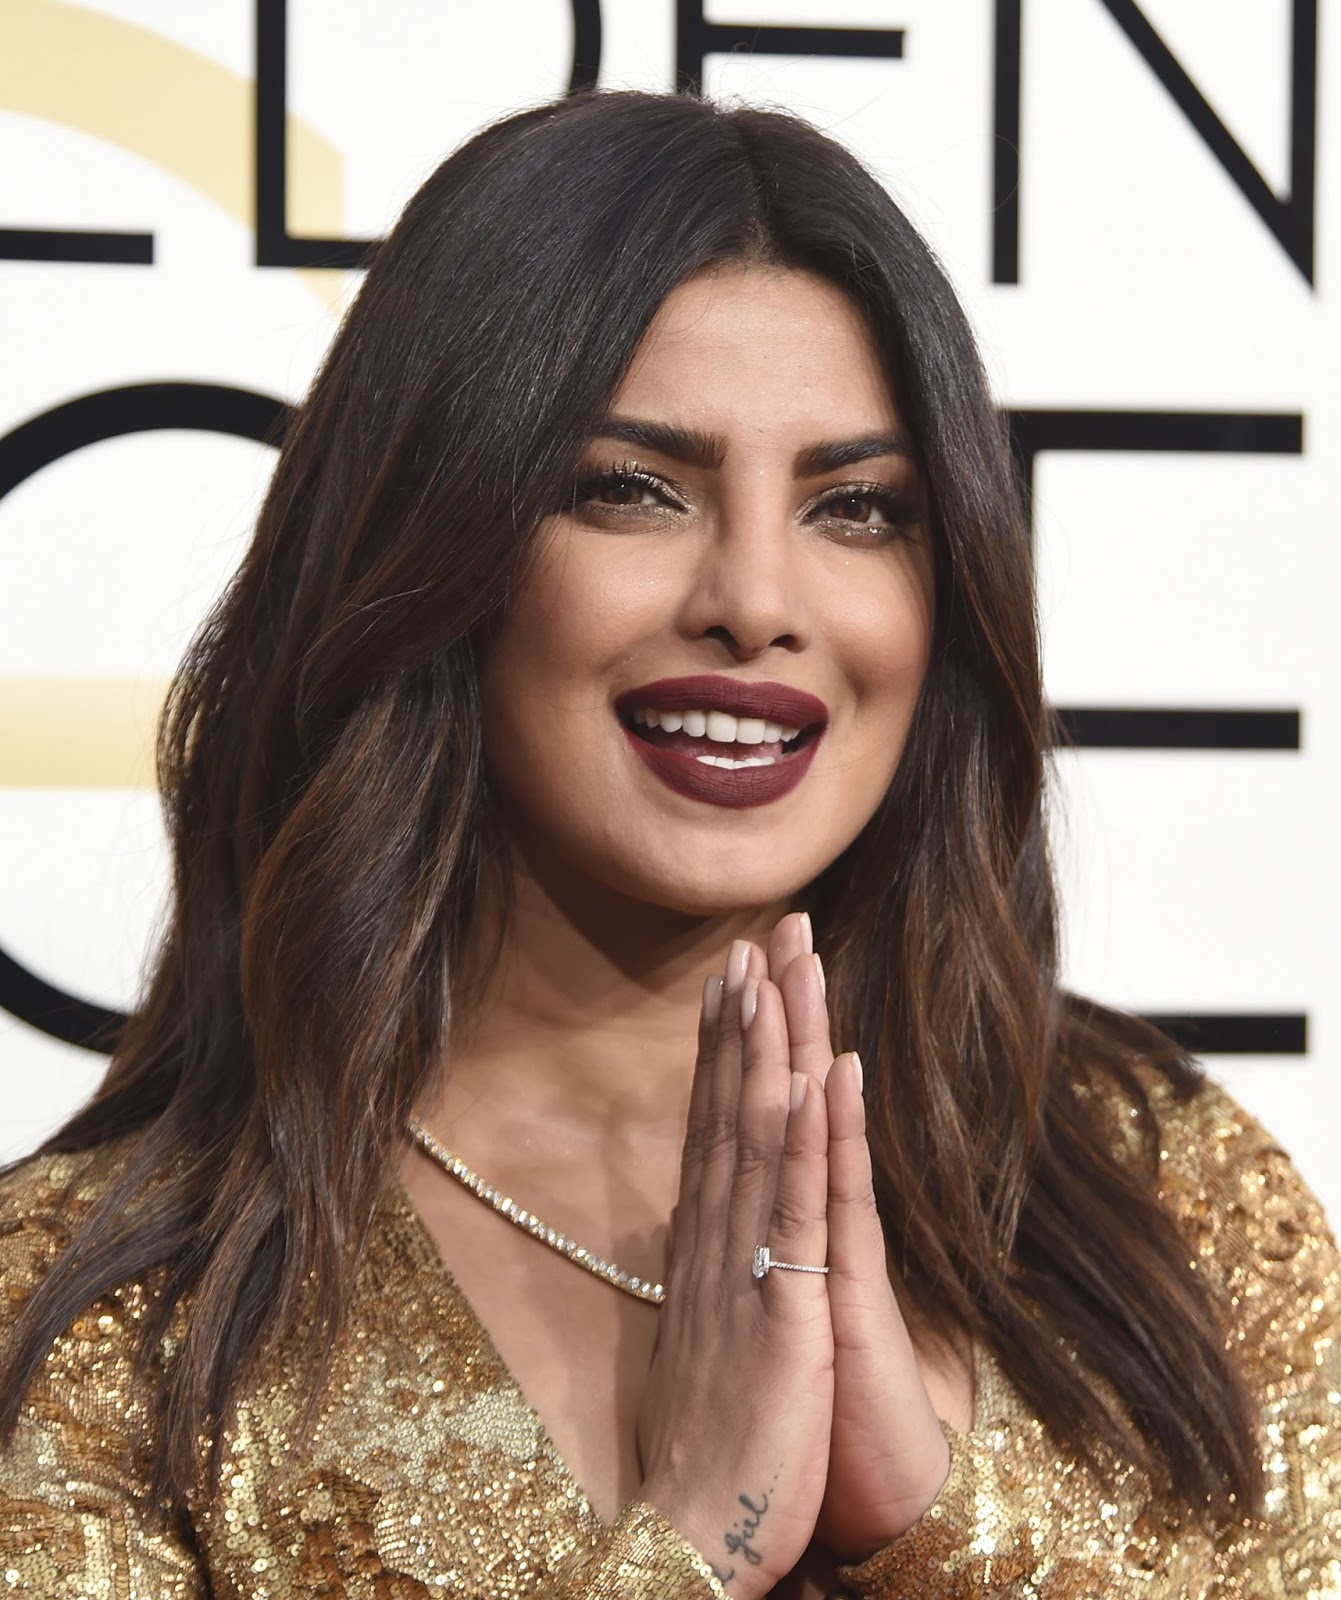 Priyanka Chopra Sexy Cleavage Show at The 74th Annual Golden Globe Awards at The Beverly Hilton Hotel in Beverly Hills